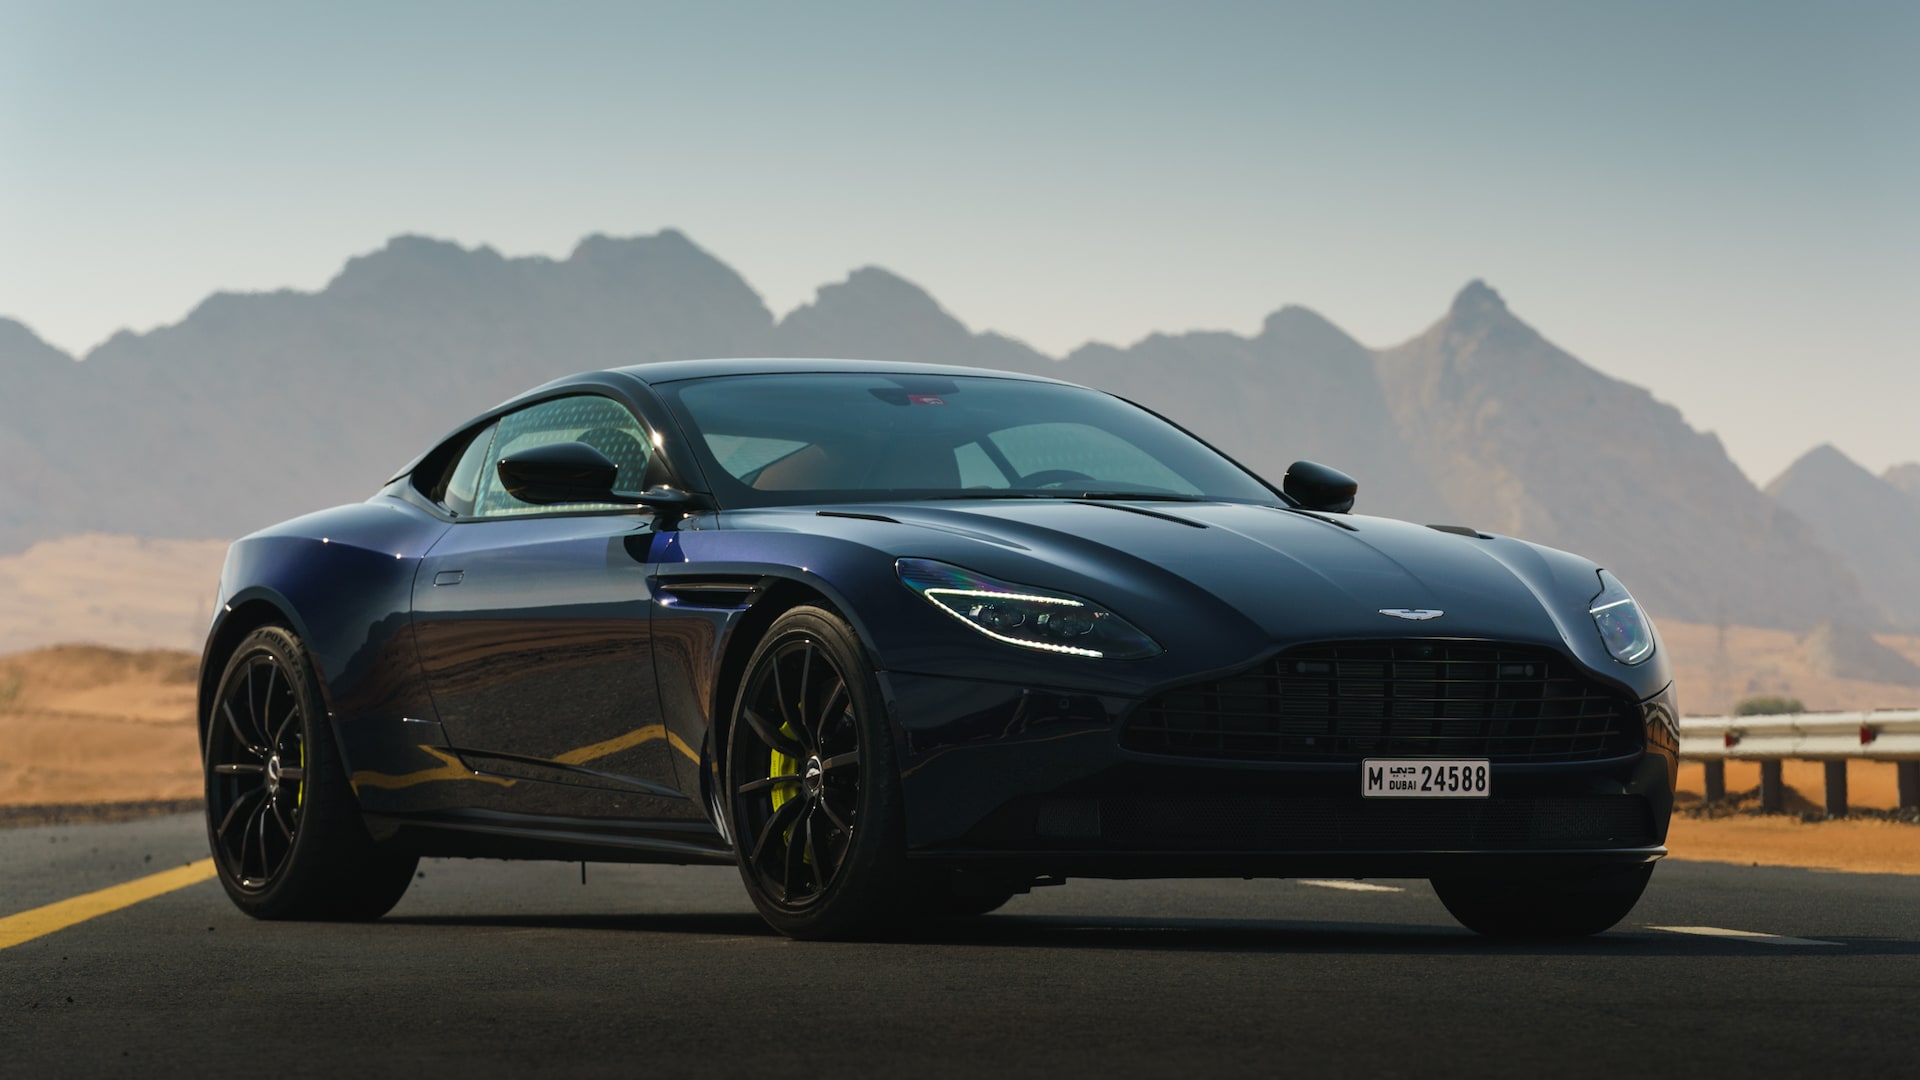 2021 Aston Martin DB11 Prices, Reviews, and Photos - MotorTrend